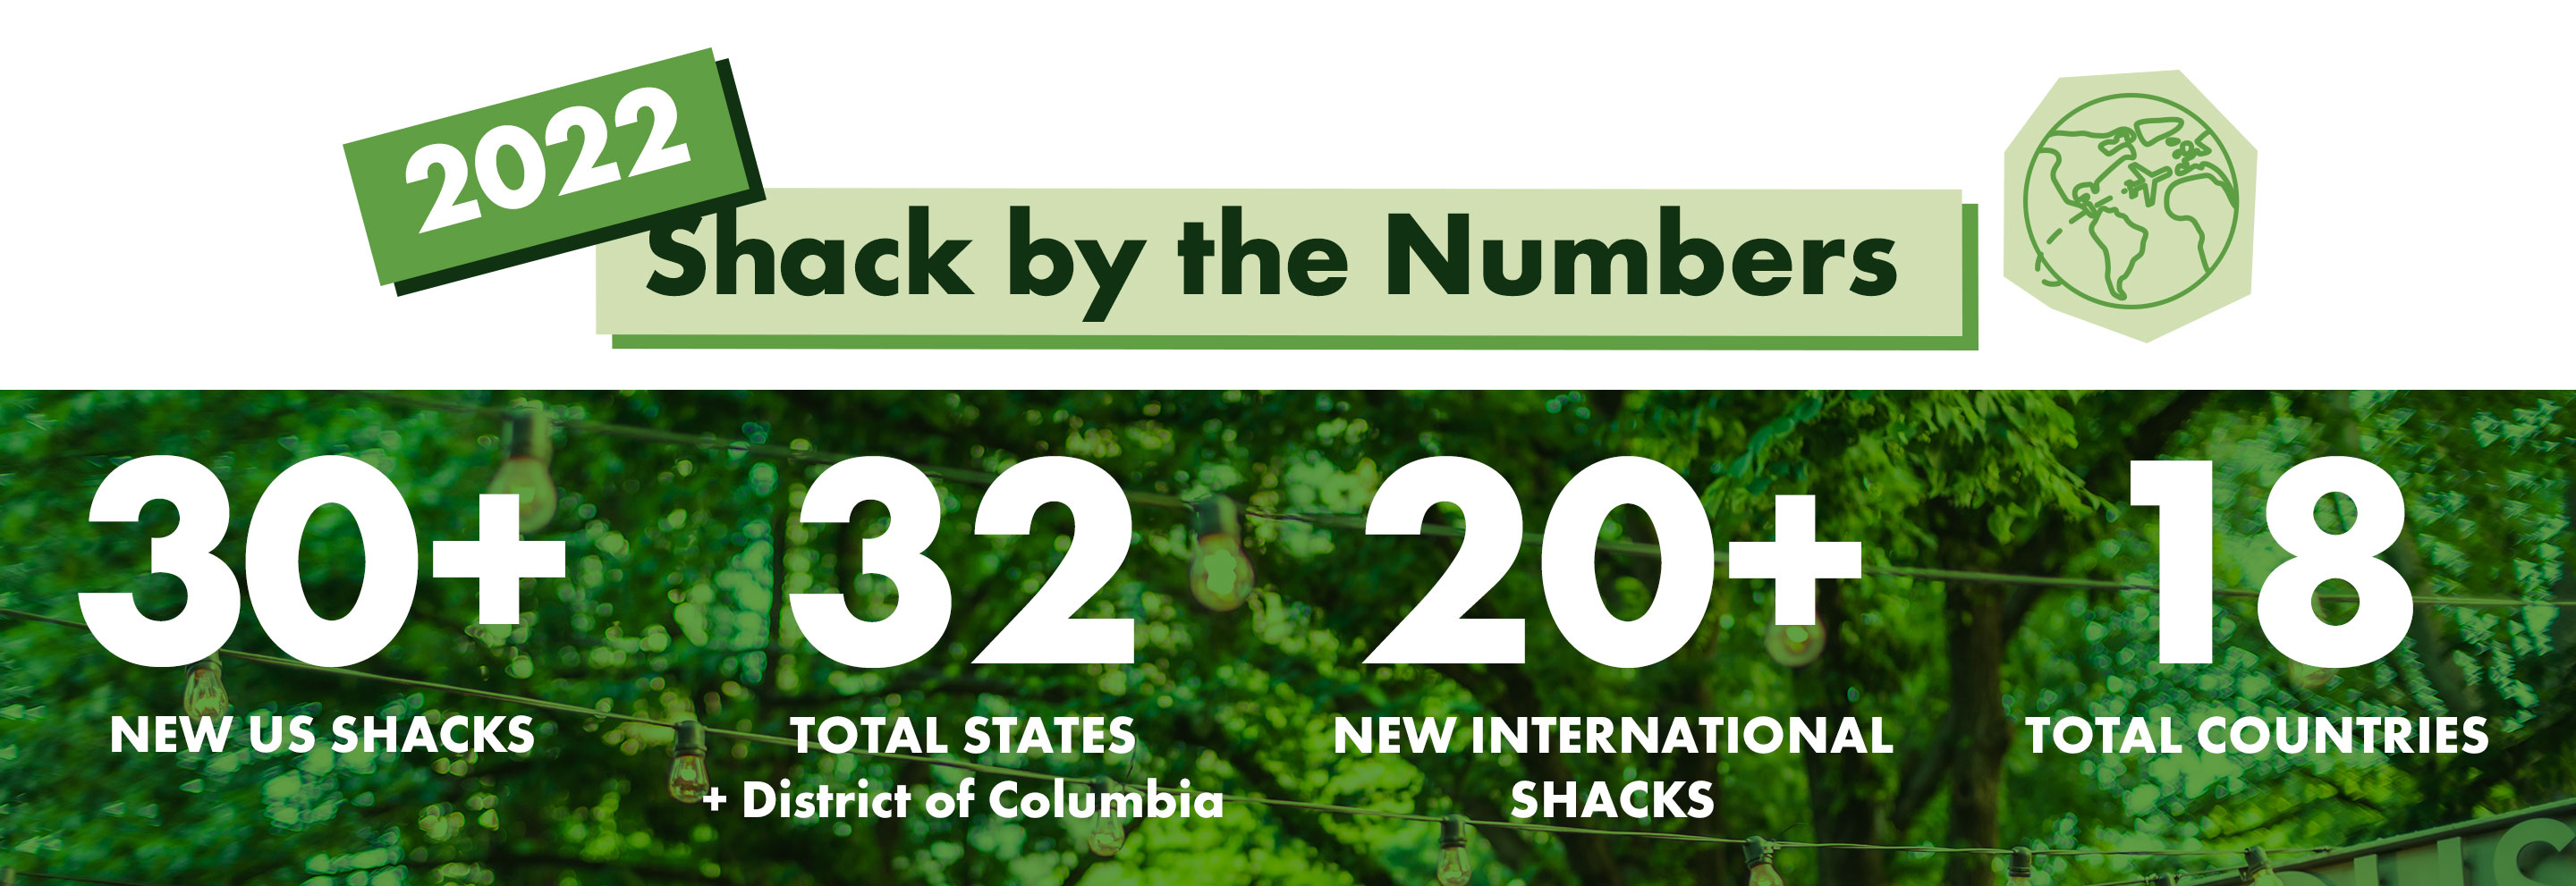 Shack By The Numbers